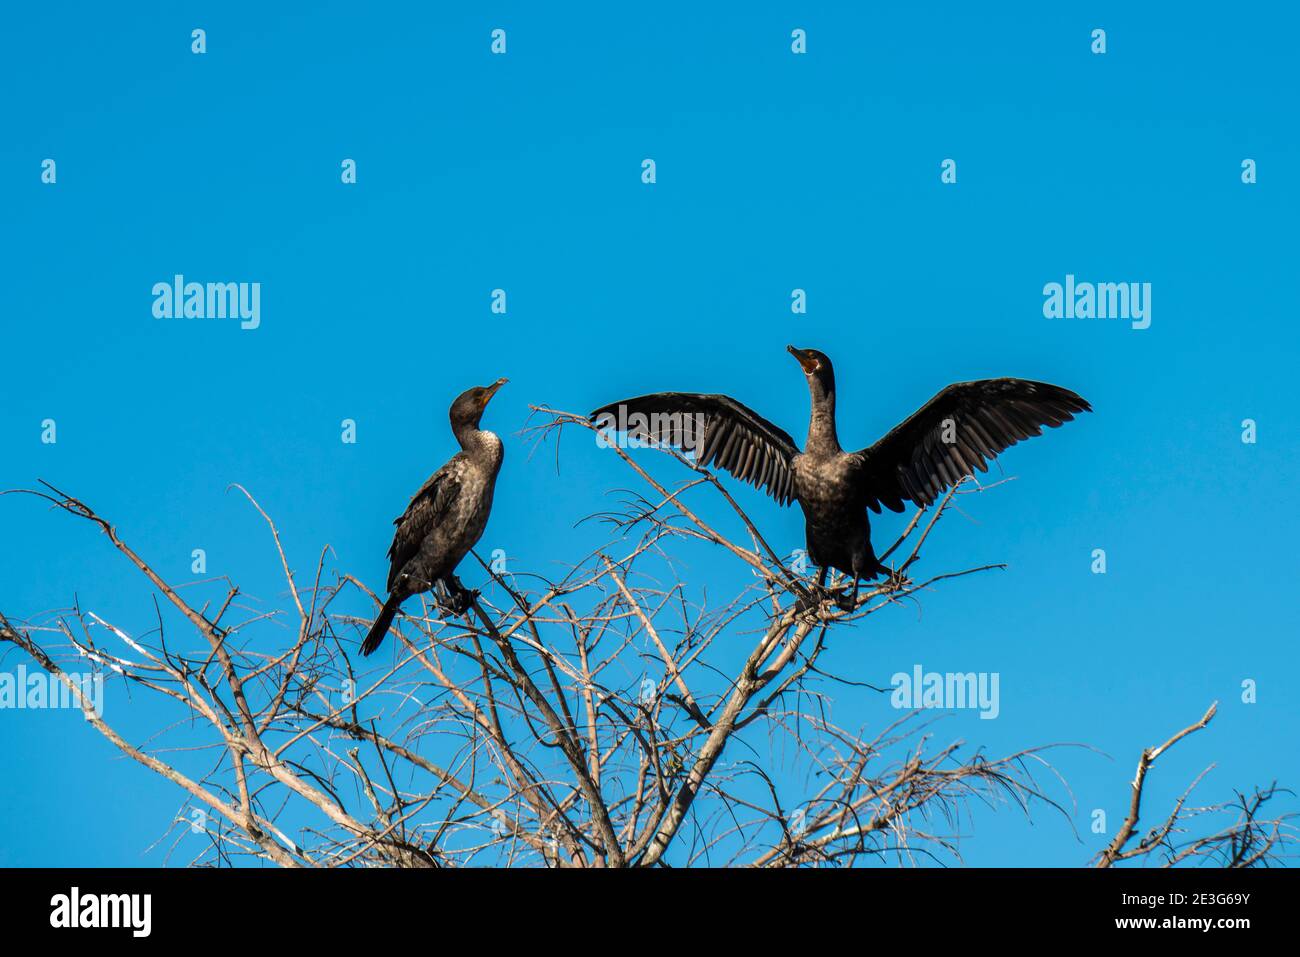 Florida. Two Anhingas sitting in a barren tree in the everglades soaking up the sun. Stock Photo